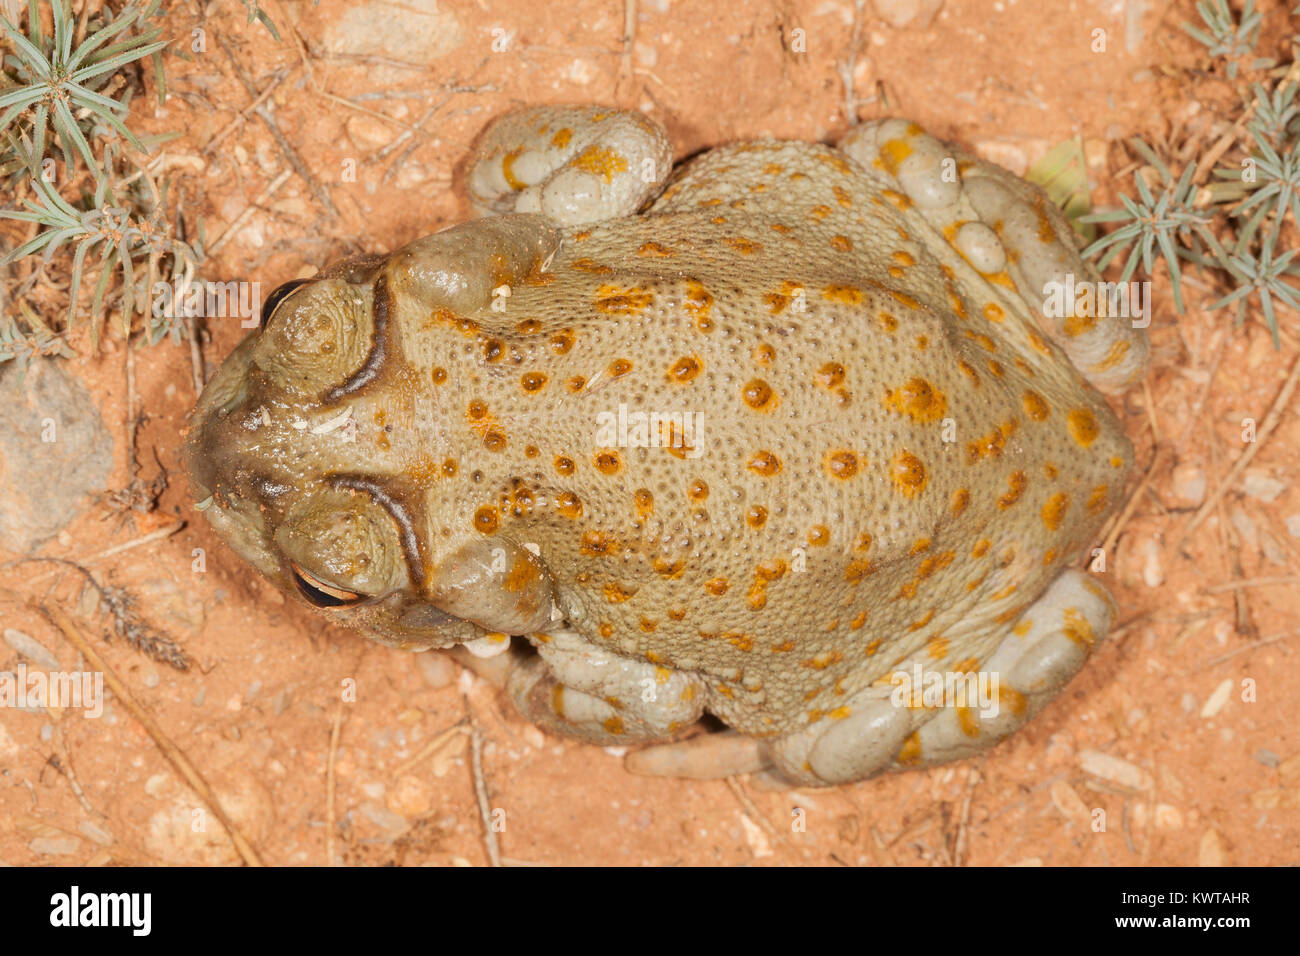 Top view of a Sonoran desert toad (Colorado River toad), Incilius alvarius (Bufo alvarius). Poison glands behind head and on legs are clearly visible. Stock Photo